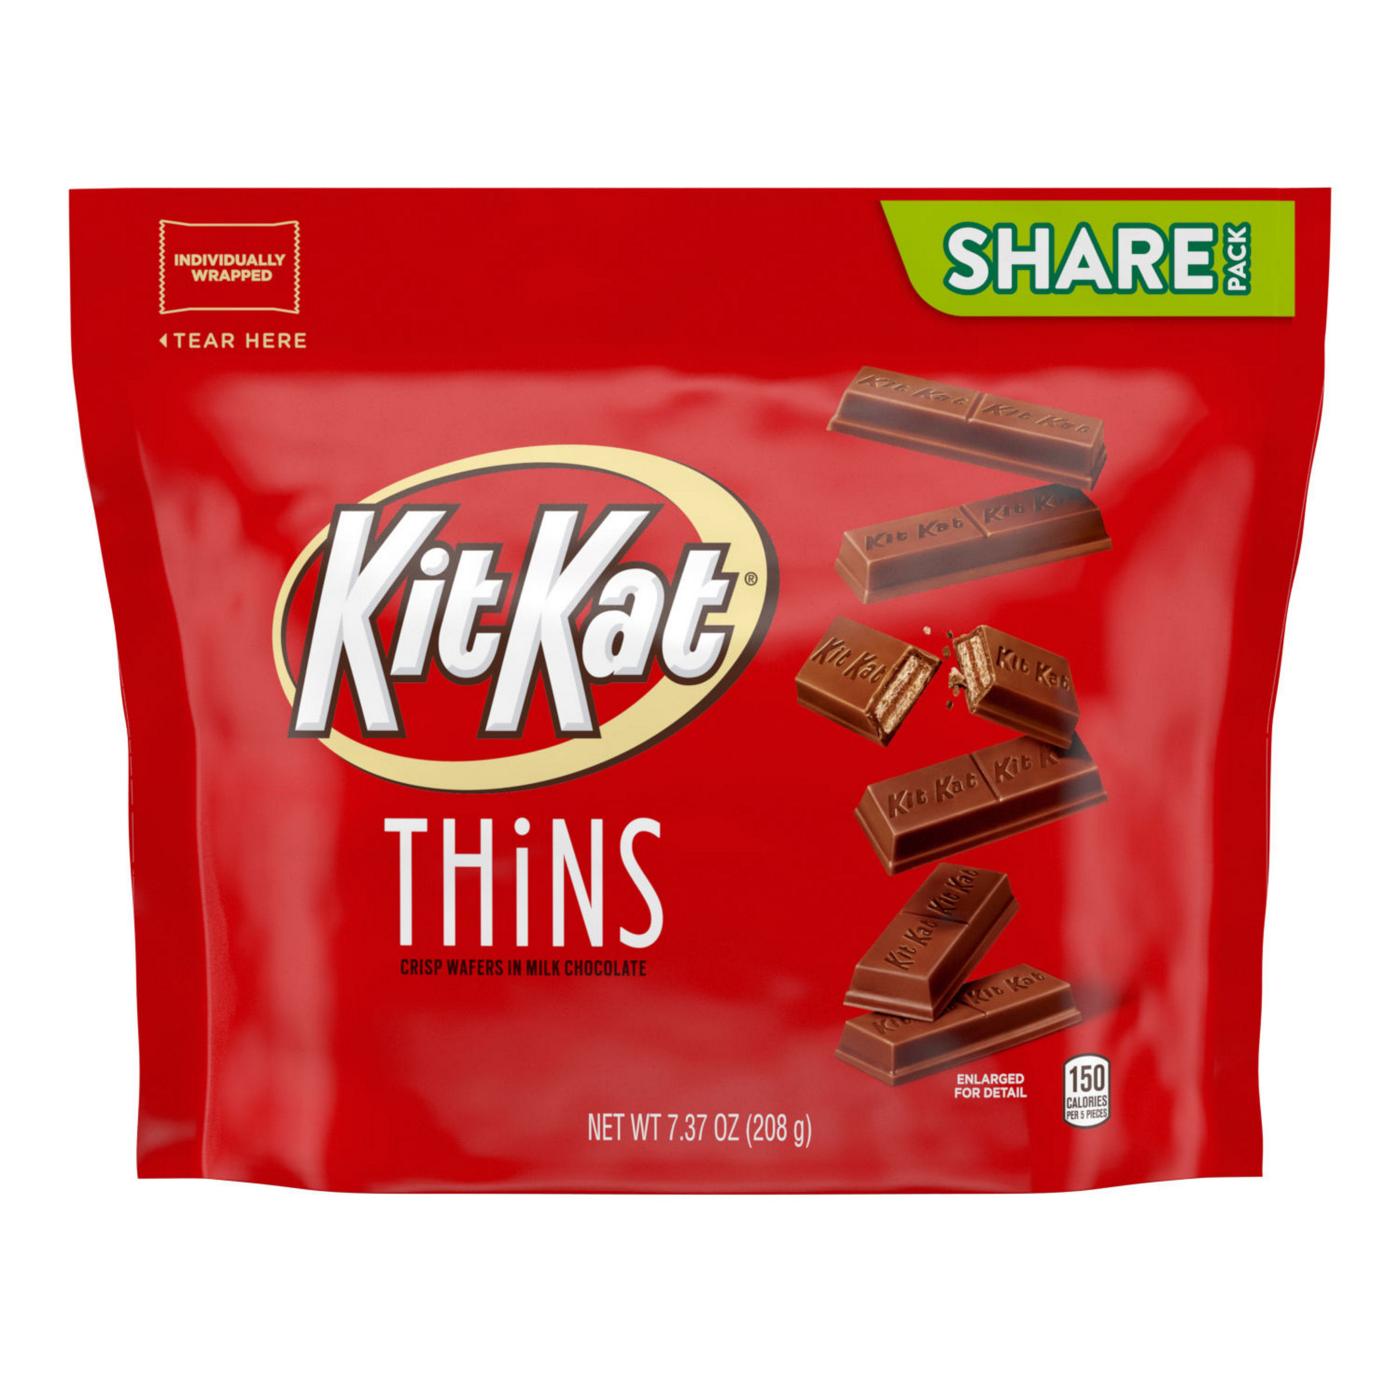 Kit Kat THiNS Milk Chocolate Candy Bars Share Pack; image 1 of 6